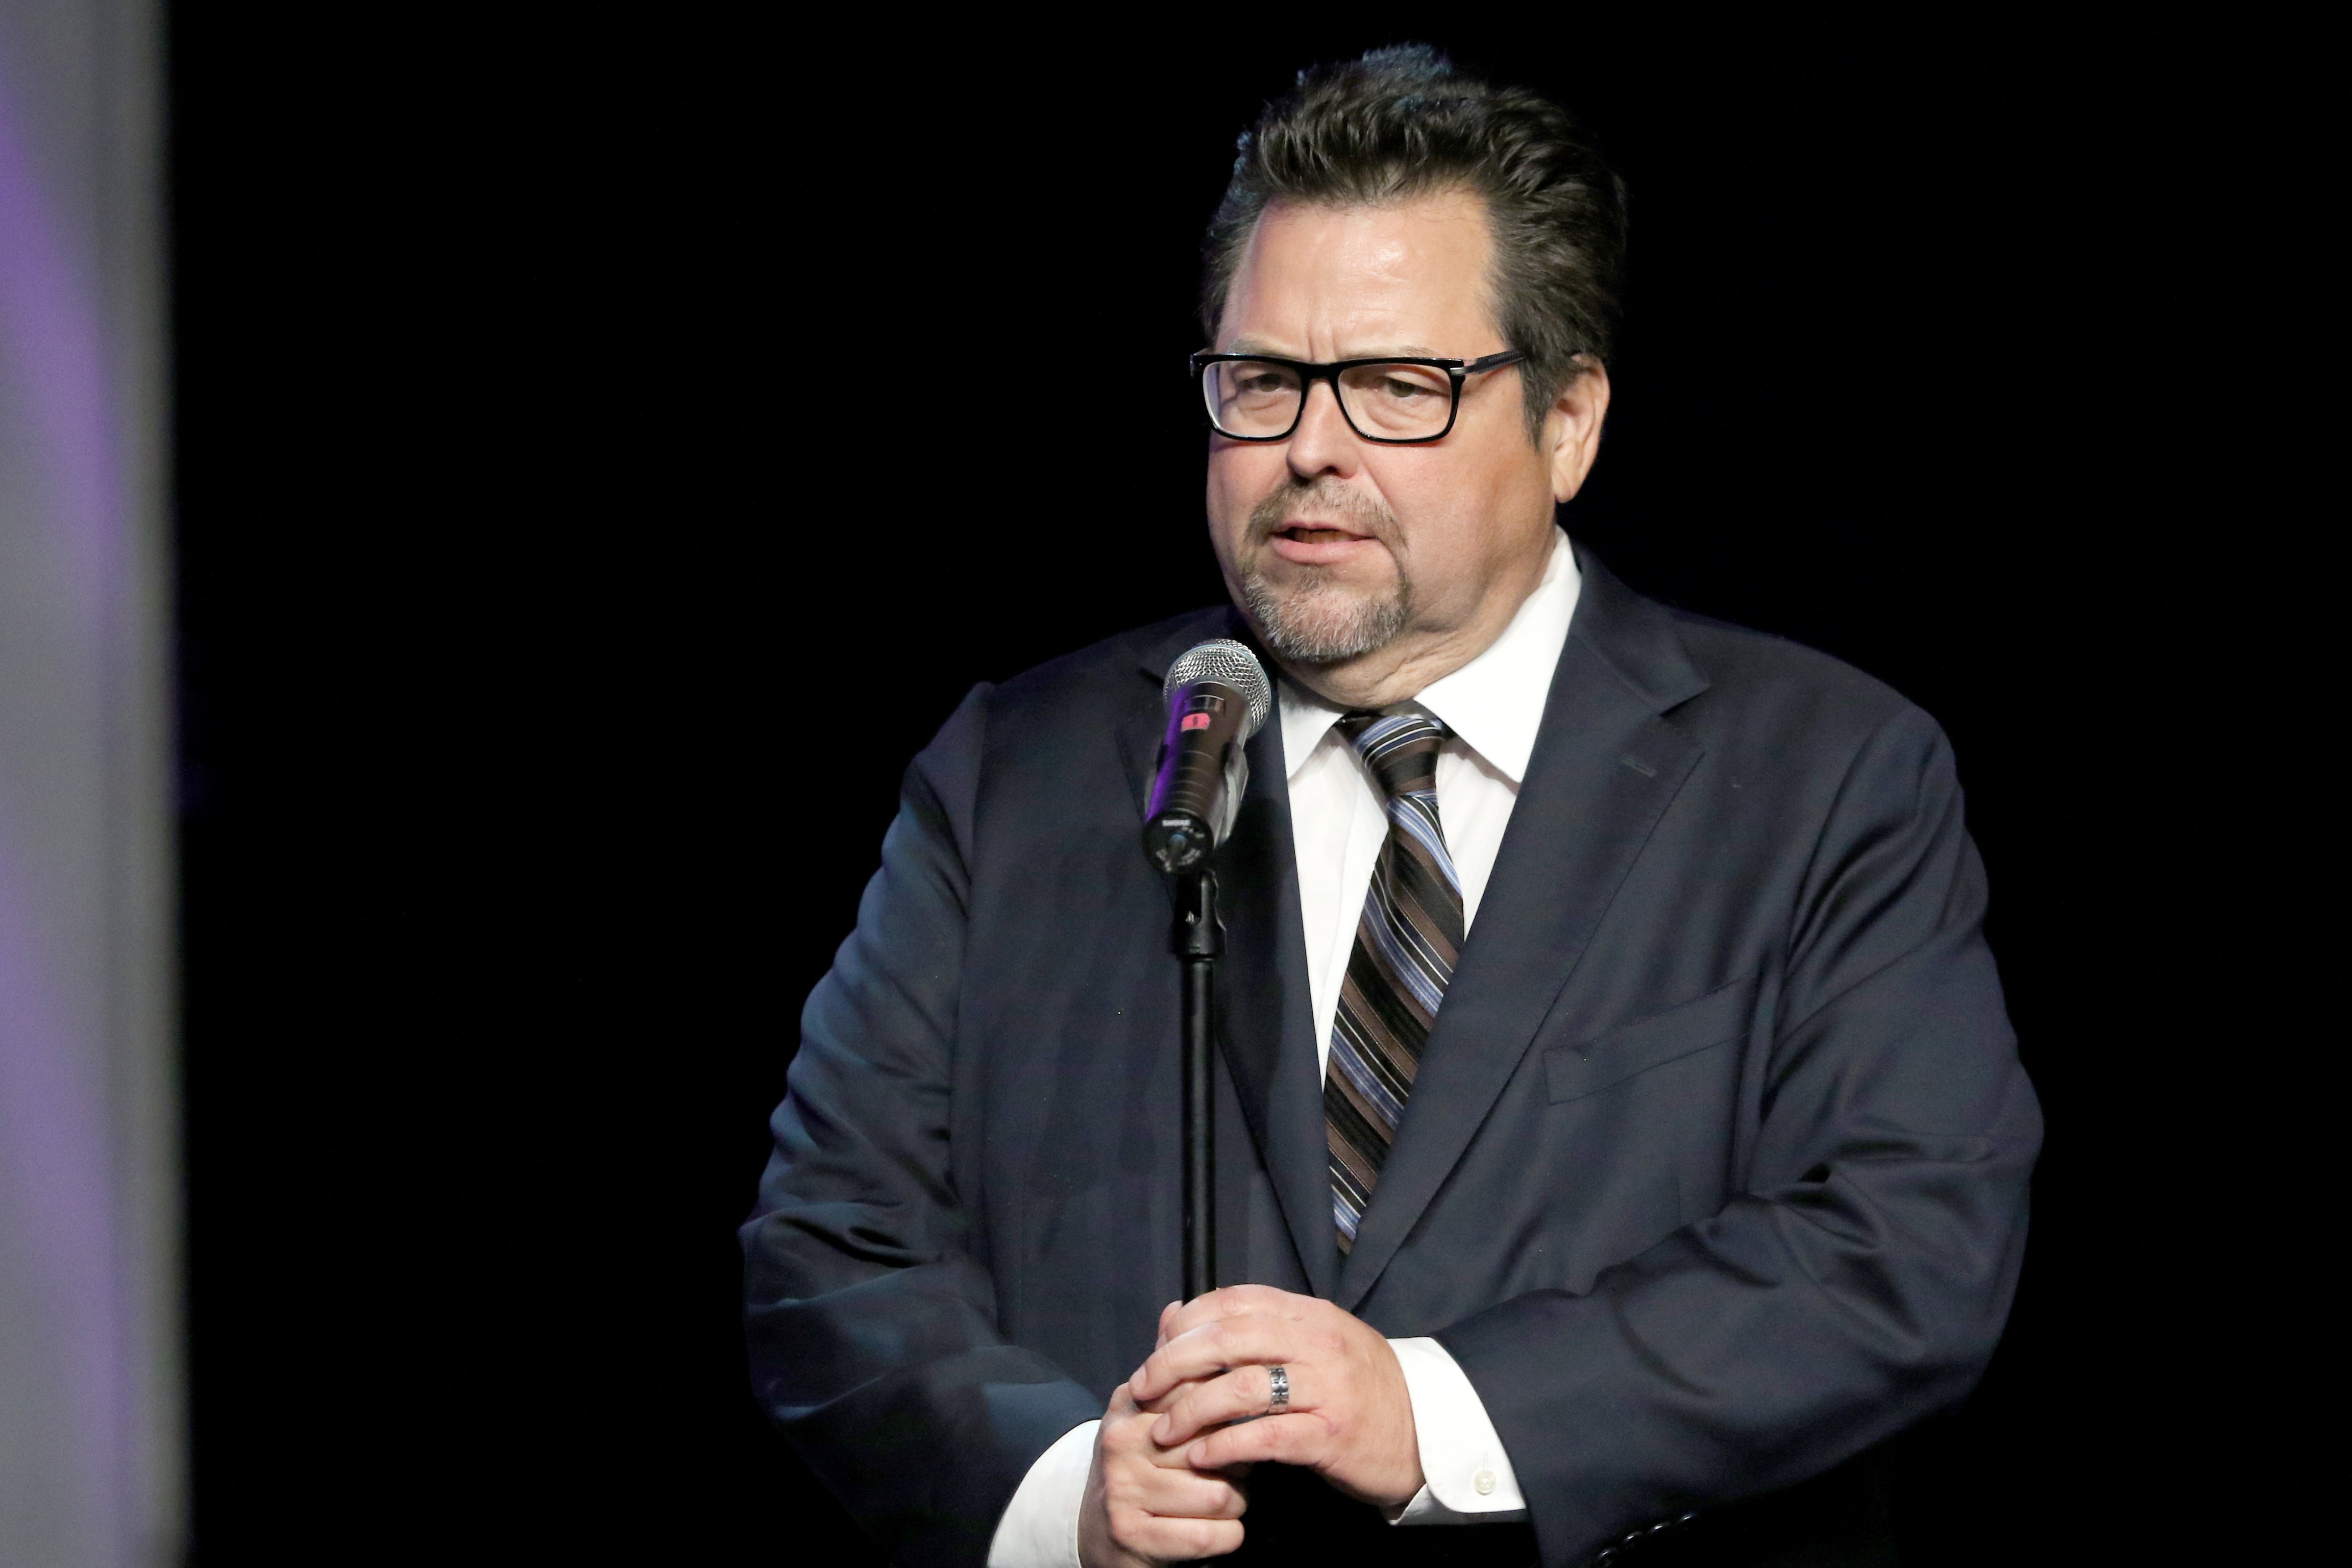 Actor Rick Najera speaks onstage during The Los Angeles Times and Hoy 2015 Latinos de Hoy Awards at Dolby Theatre in Hollywood, on Oct. 11, 2015. (JC Olivera—Latinos de Hoy Awards/Getty Images)